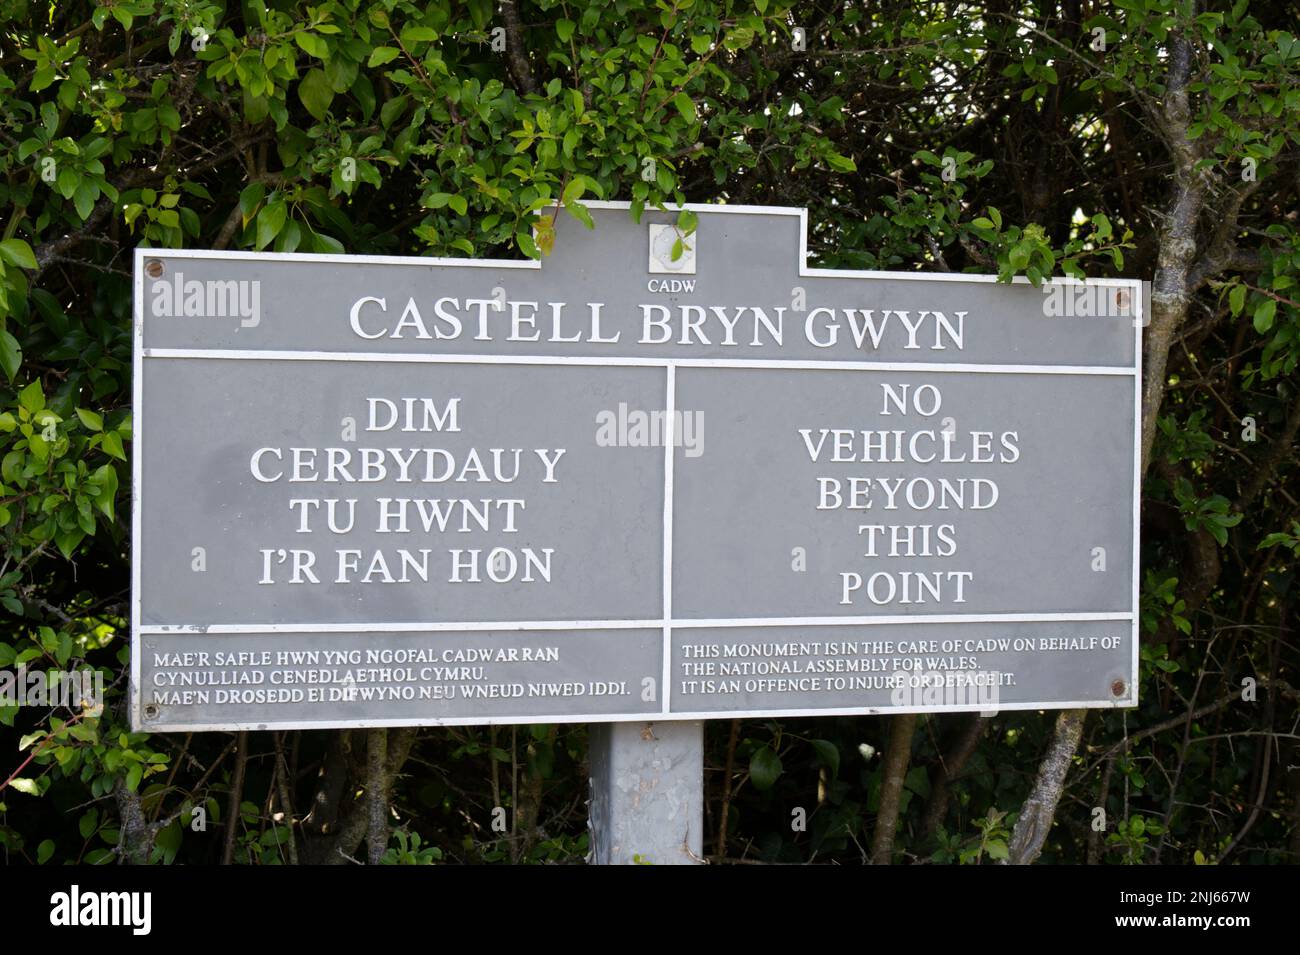 CADW sign for bryn gwyn castle prehistoric site on Anglesey Wales UK in May Stock Photo